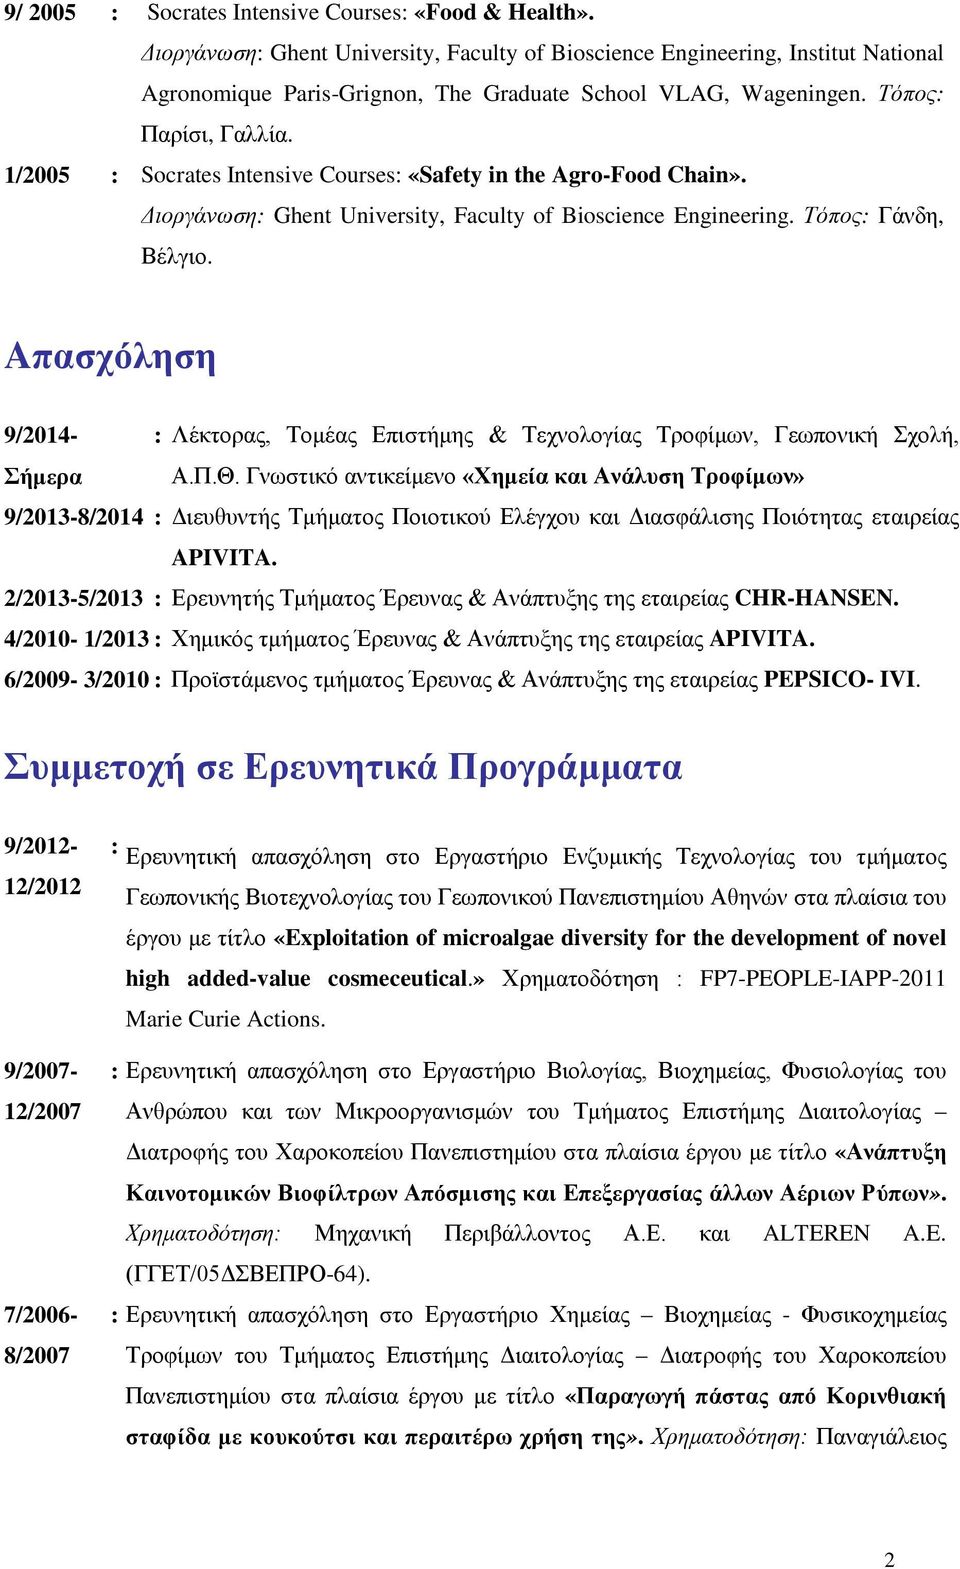 1/2005 : Socrates Intensive Courses: «Safety in the Agro-Food Chain». Διοργάνωση: Ghent University, Faculty of Bioscience Engineering. Τόπος: Γάνδη, Βέλγιο.